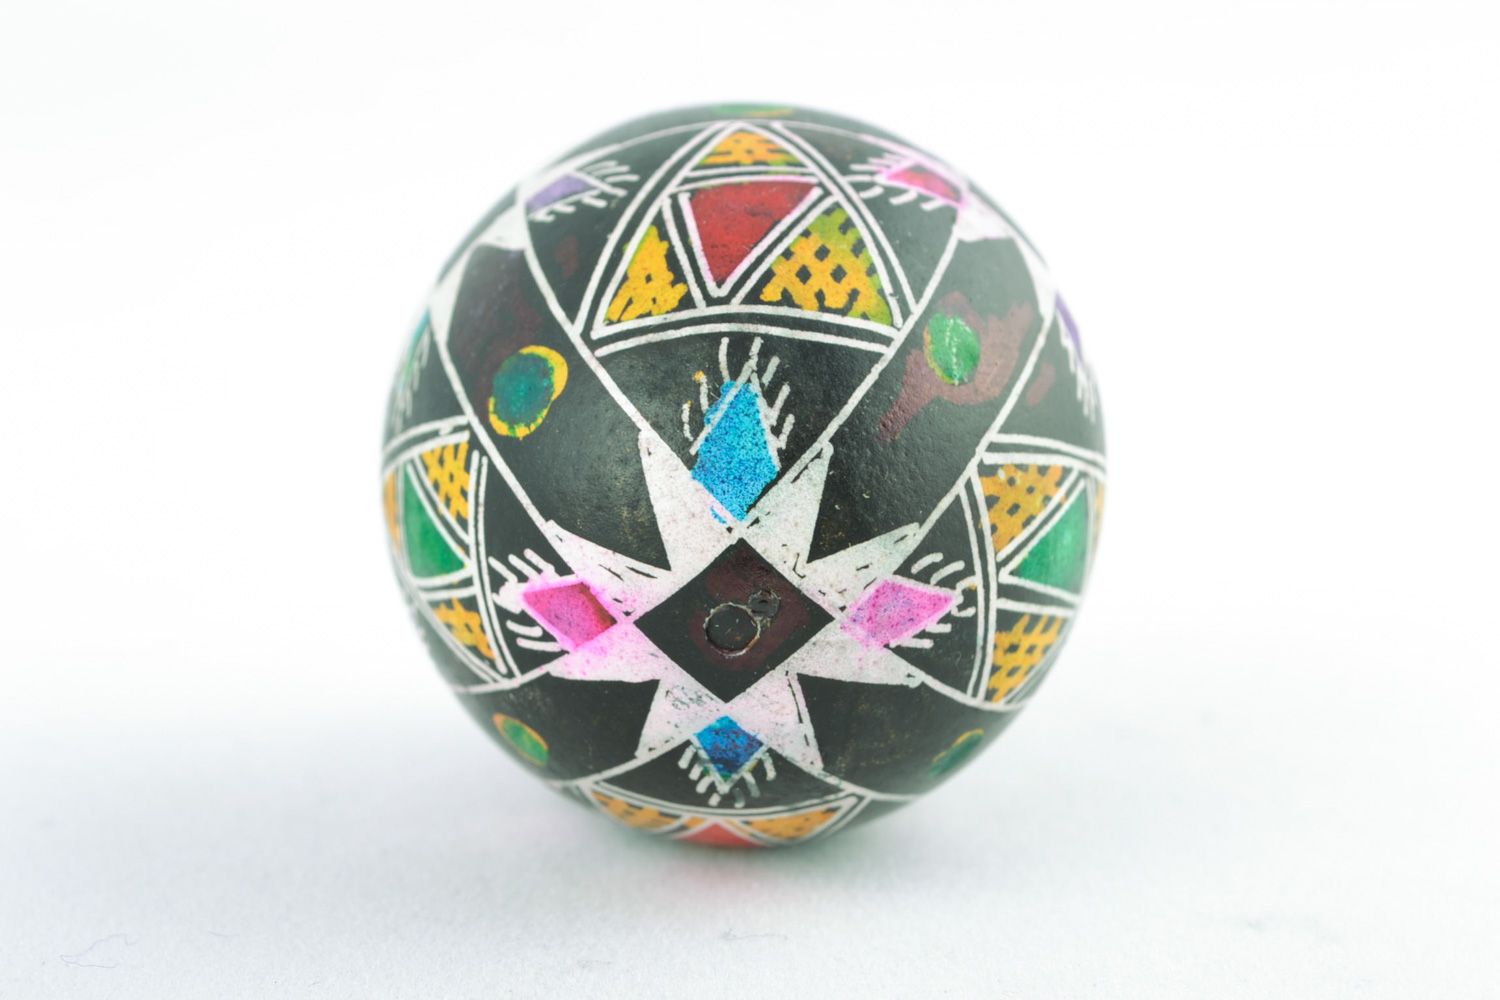 Handmade Easter egg with contrast geometric ornament painted using wax technique photo 5